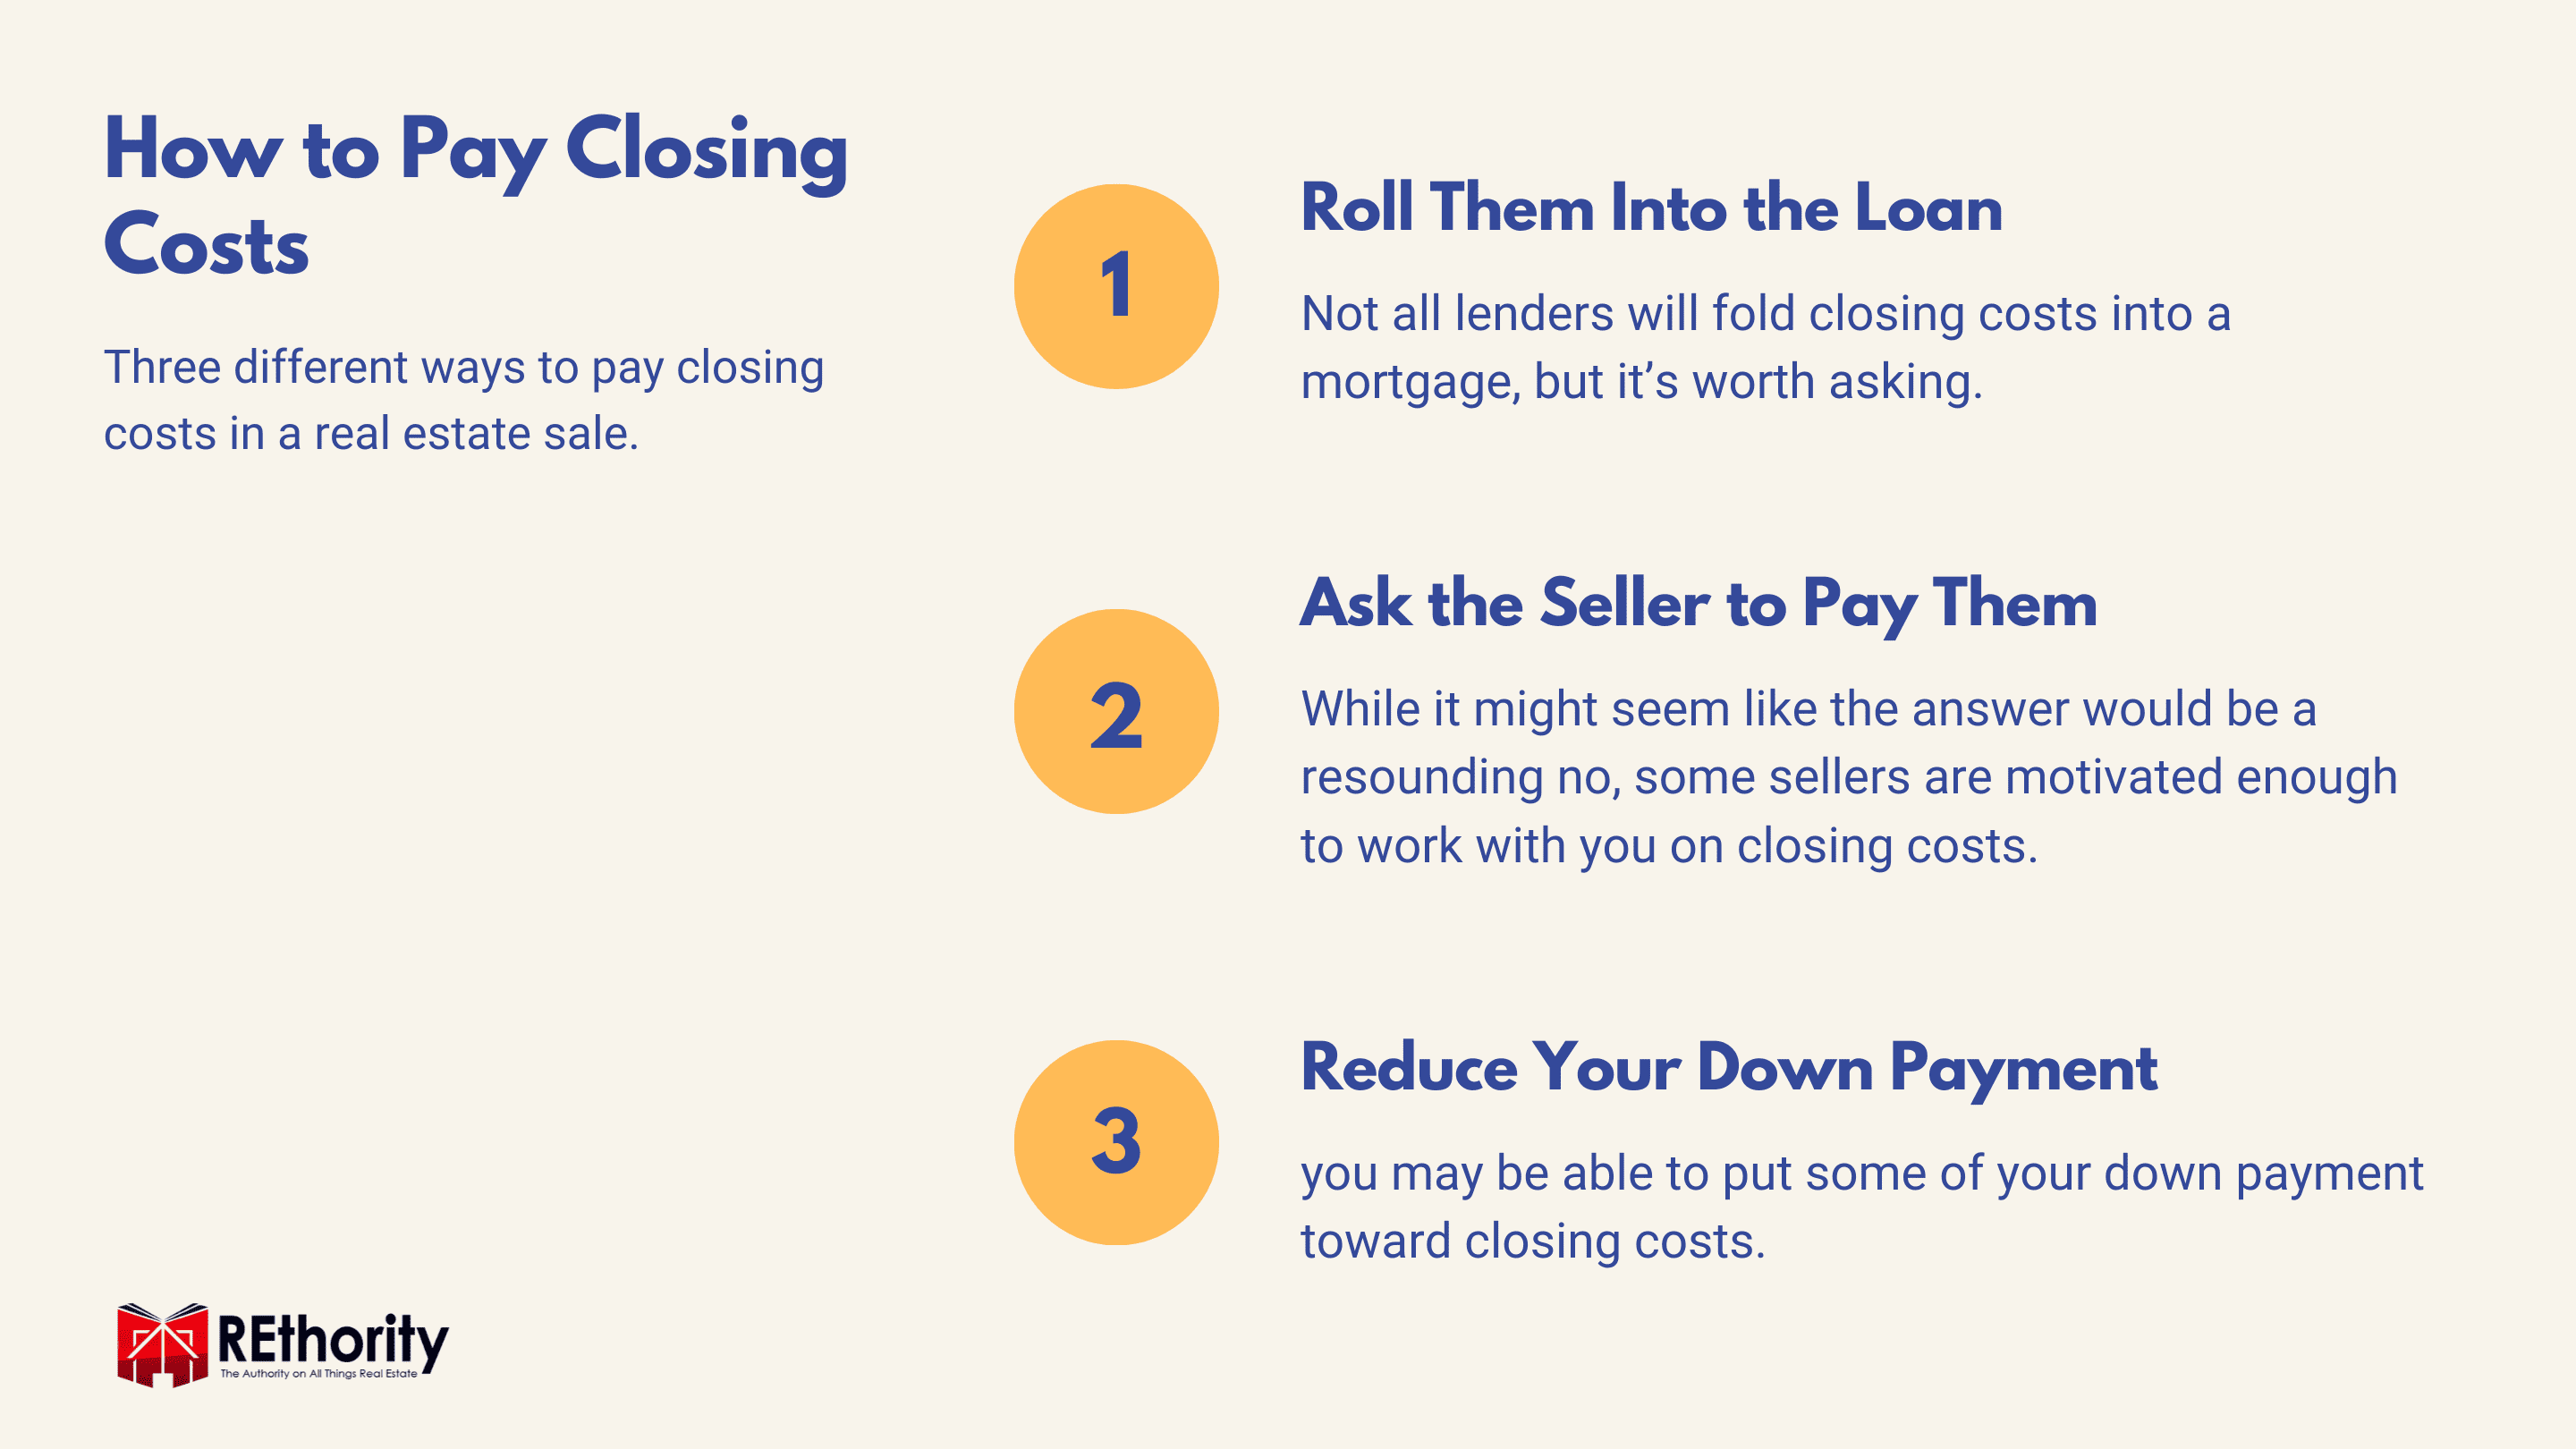 How to Pay Closing Costs graphic explaining the three different ways to pay them